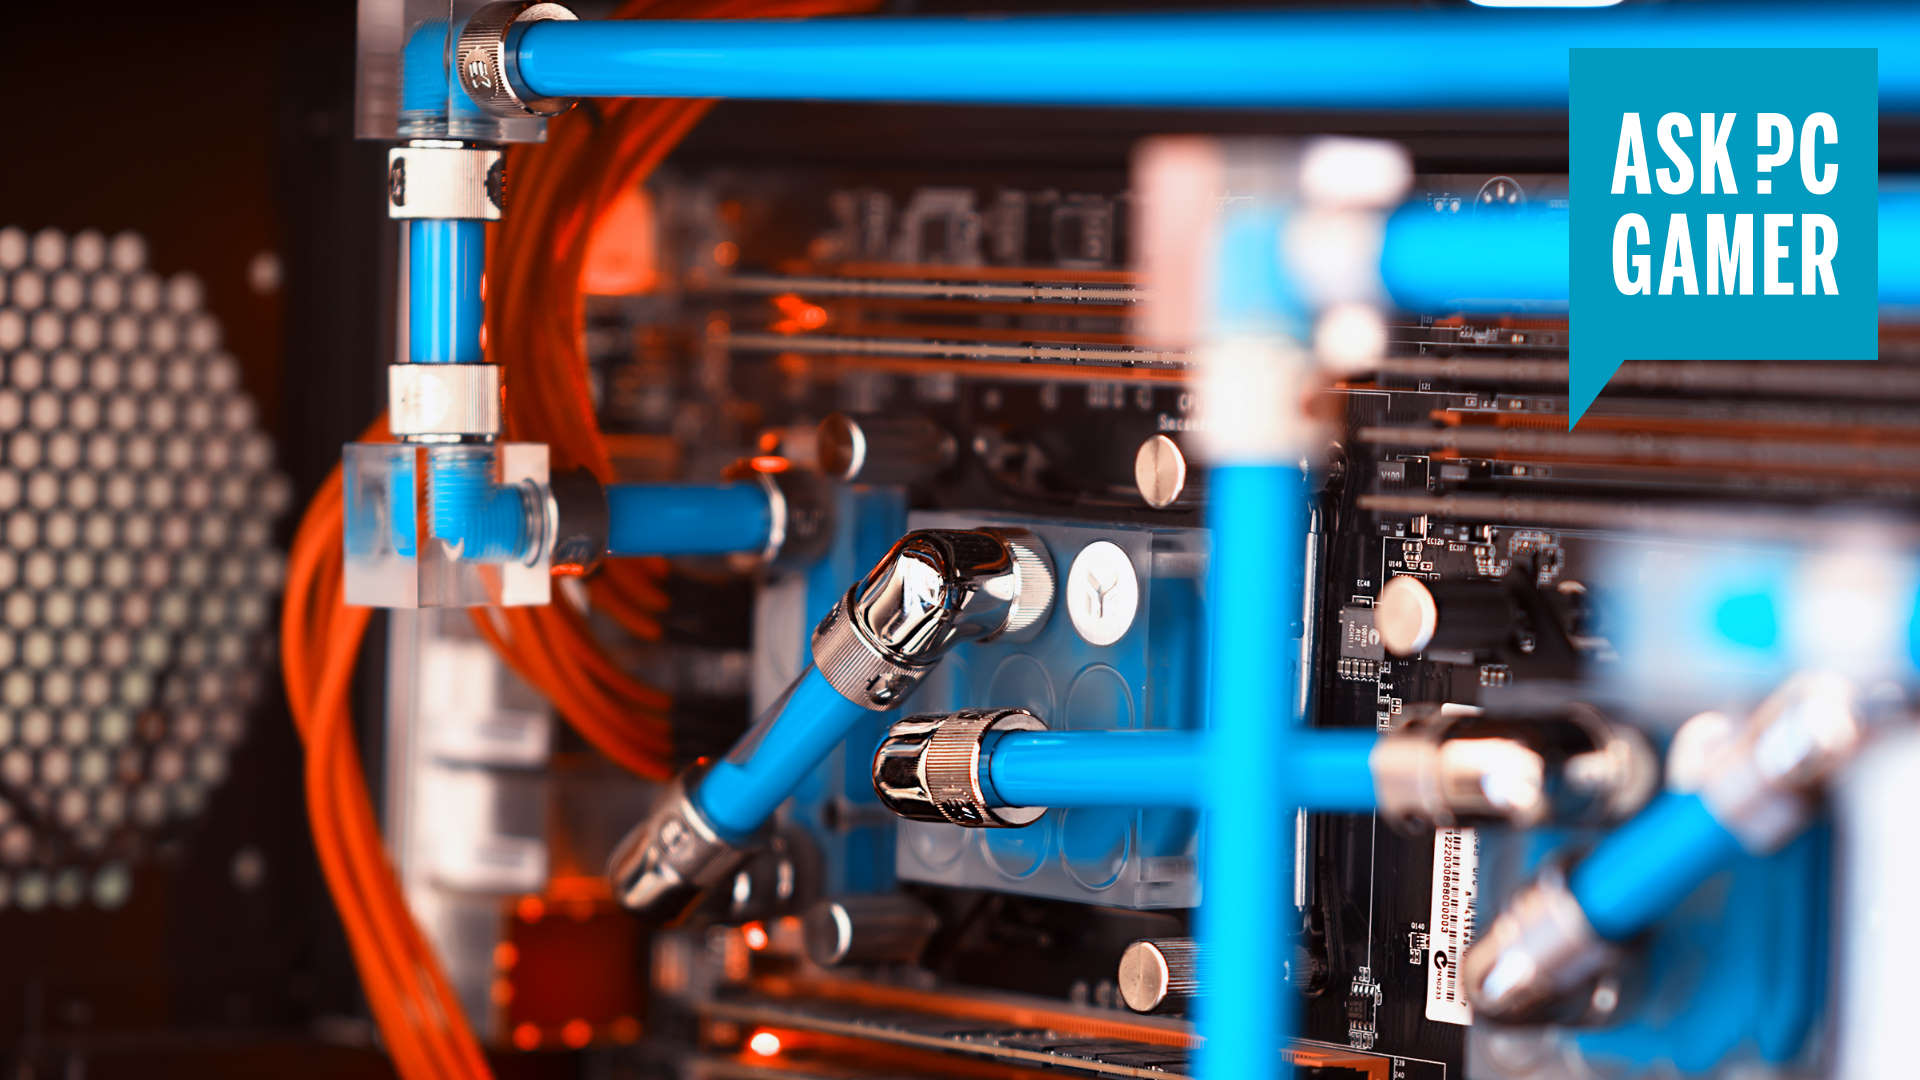 How safe is water cooling PC?